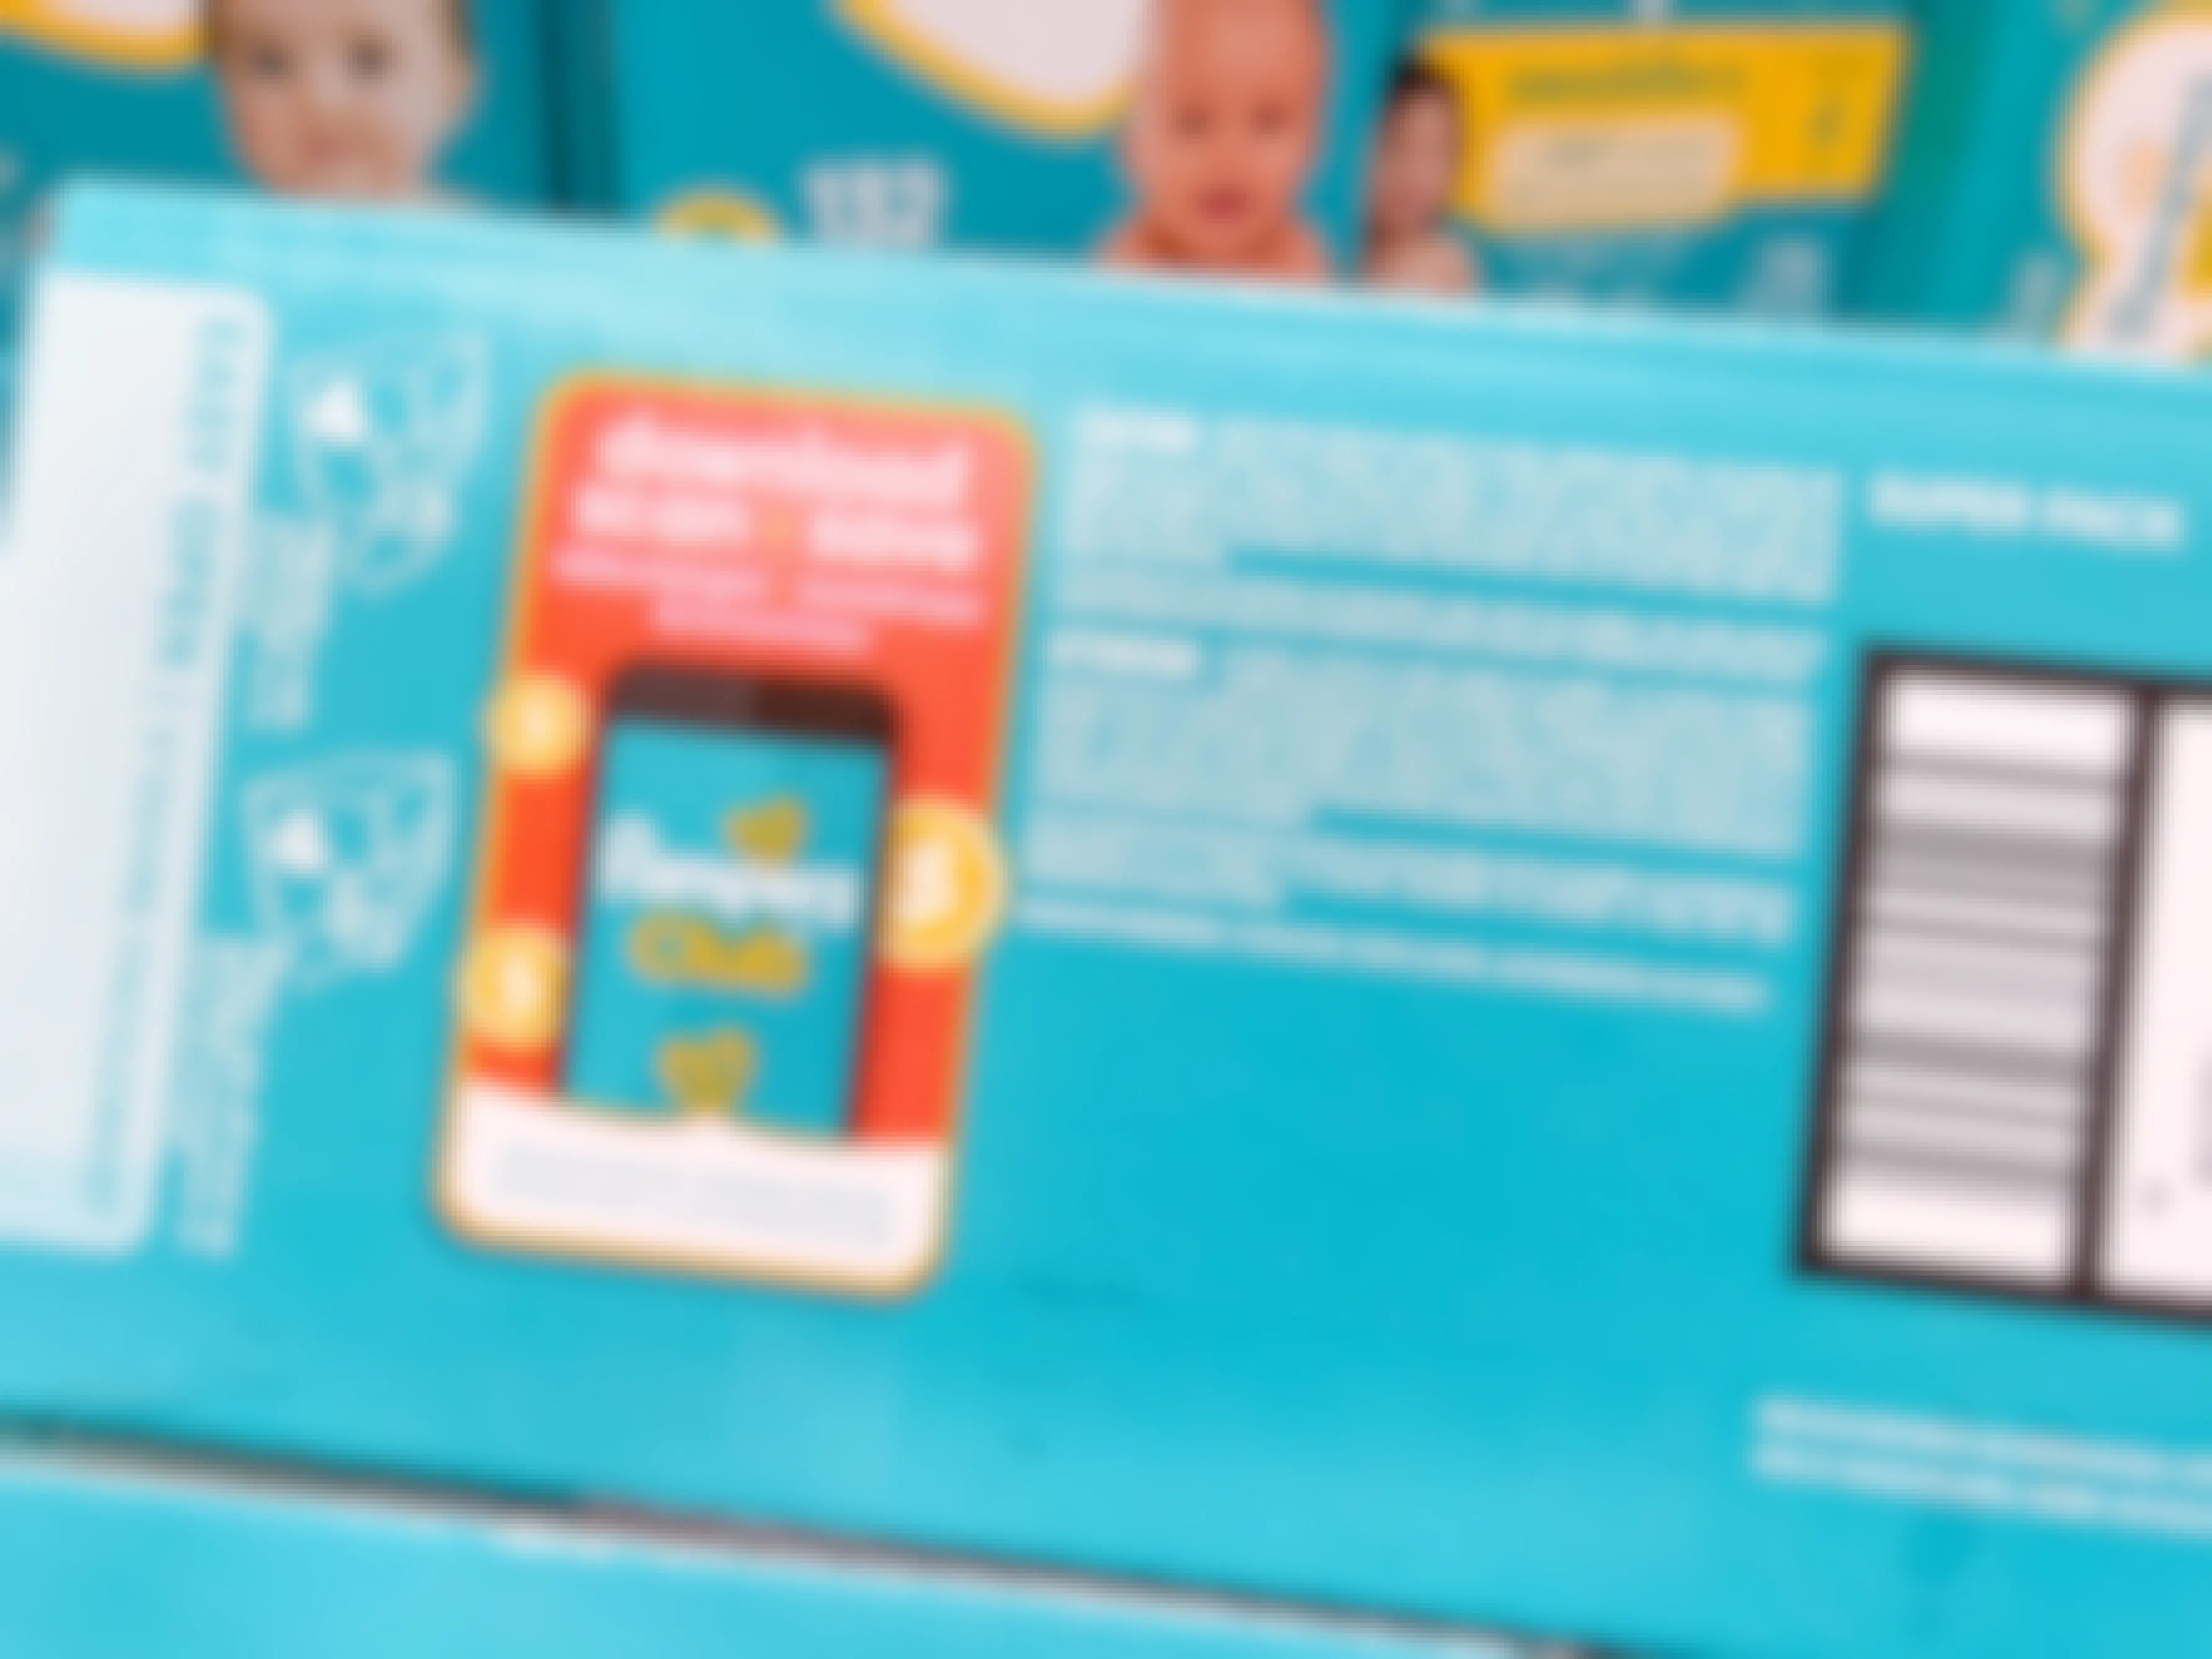 a box of pampers with the scan and save club info on box